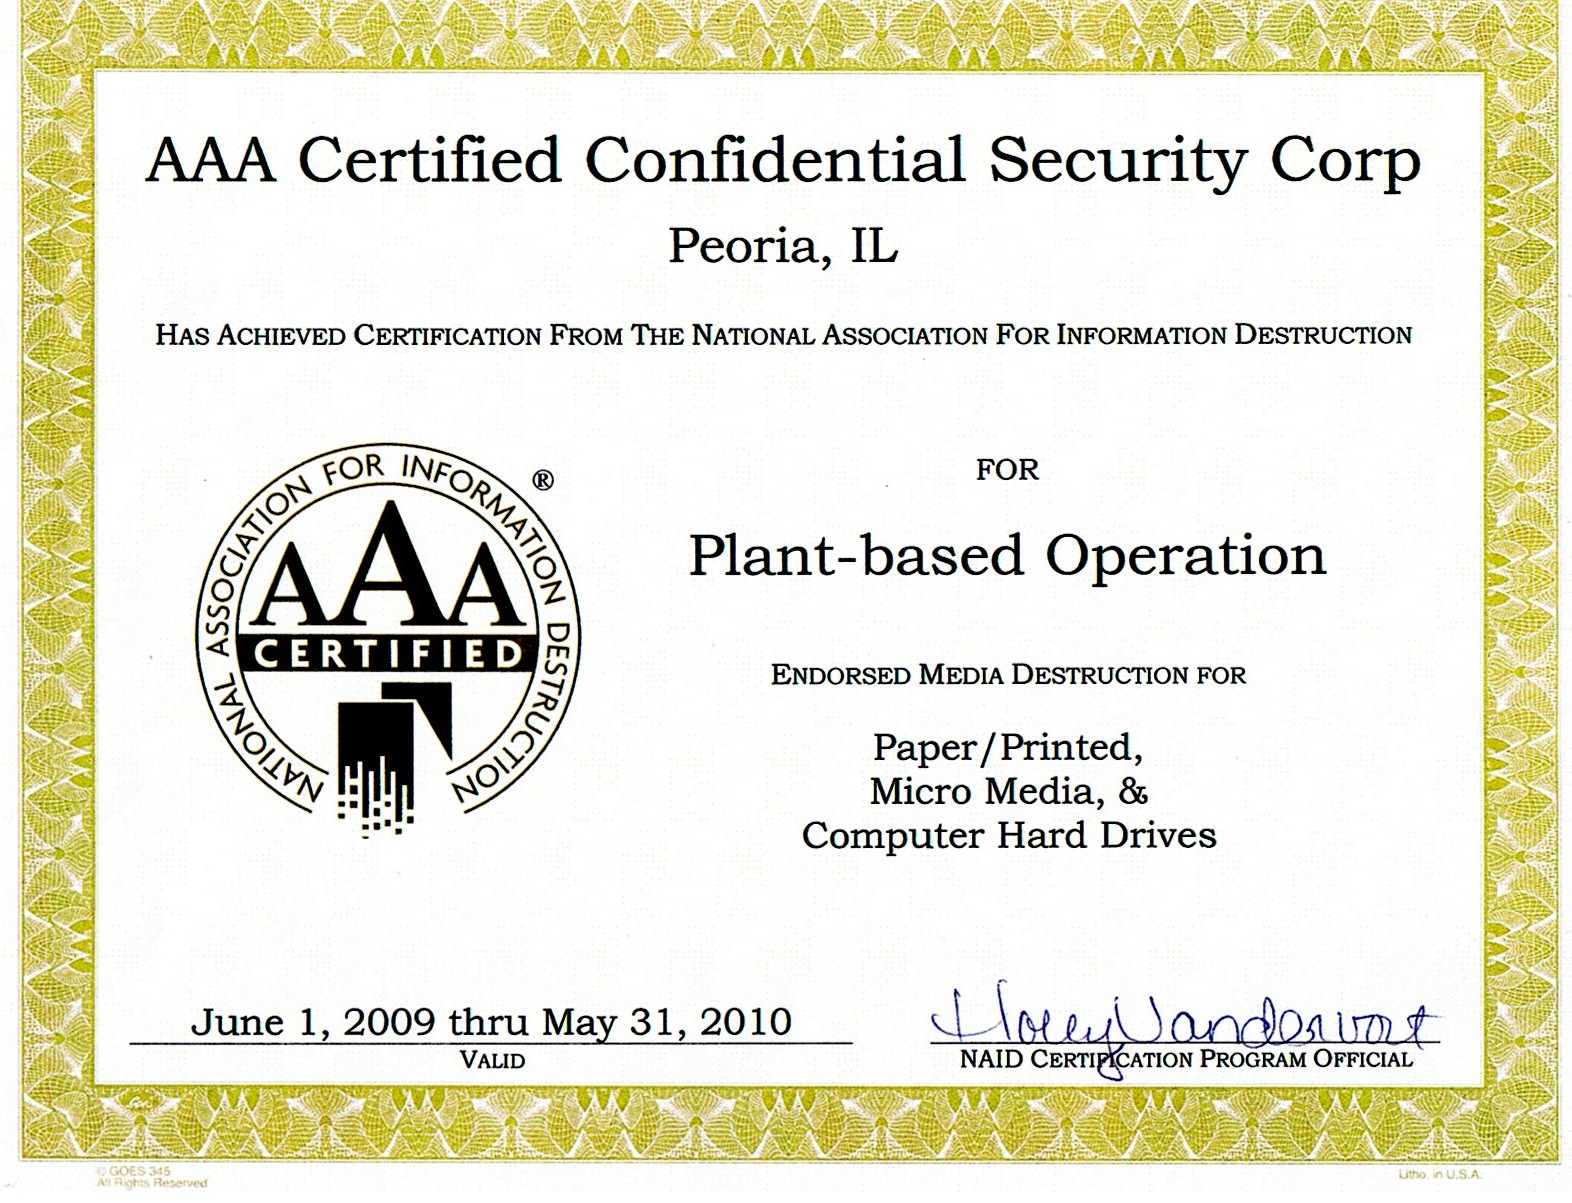 Certified to NAID standards 10th Consecutive Year AAA Certified